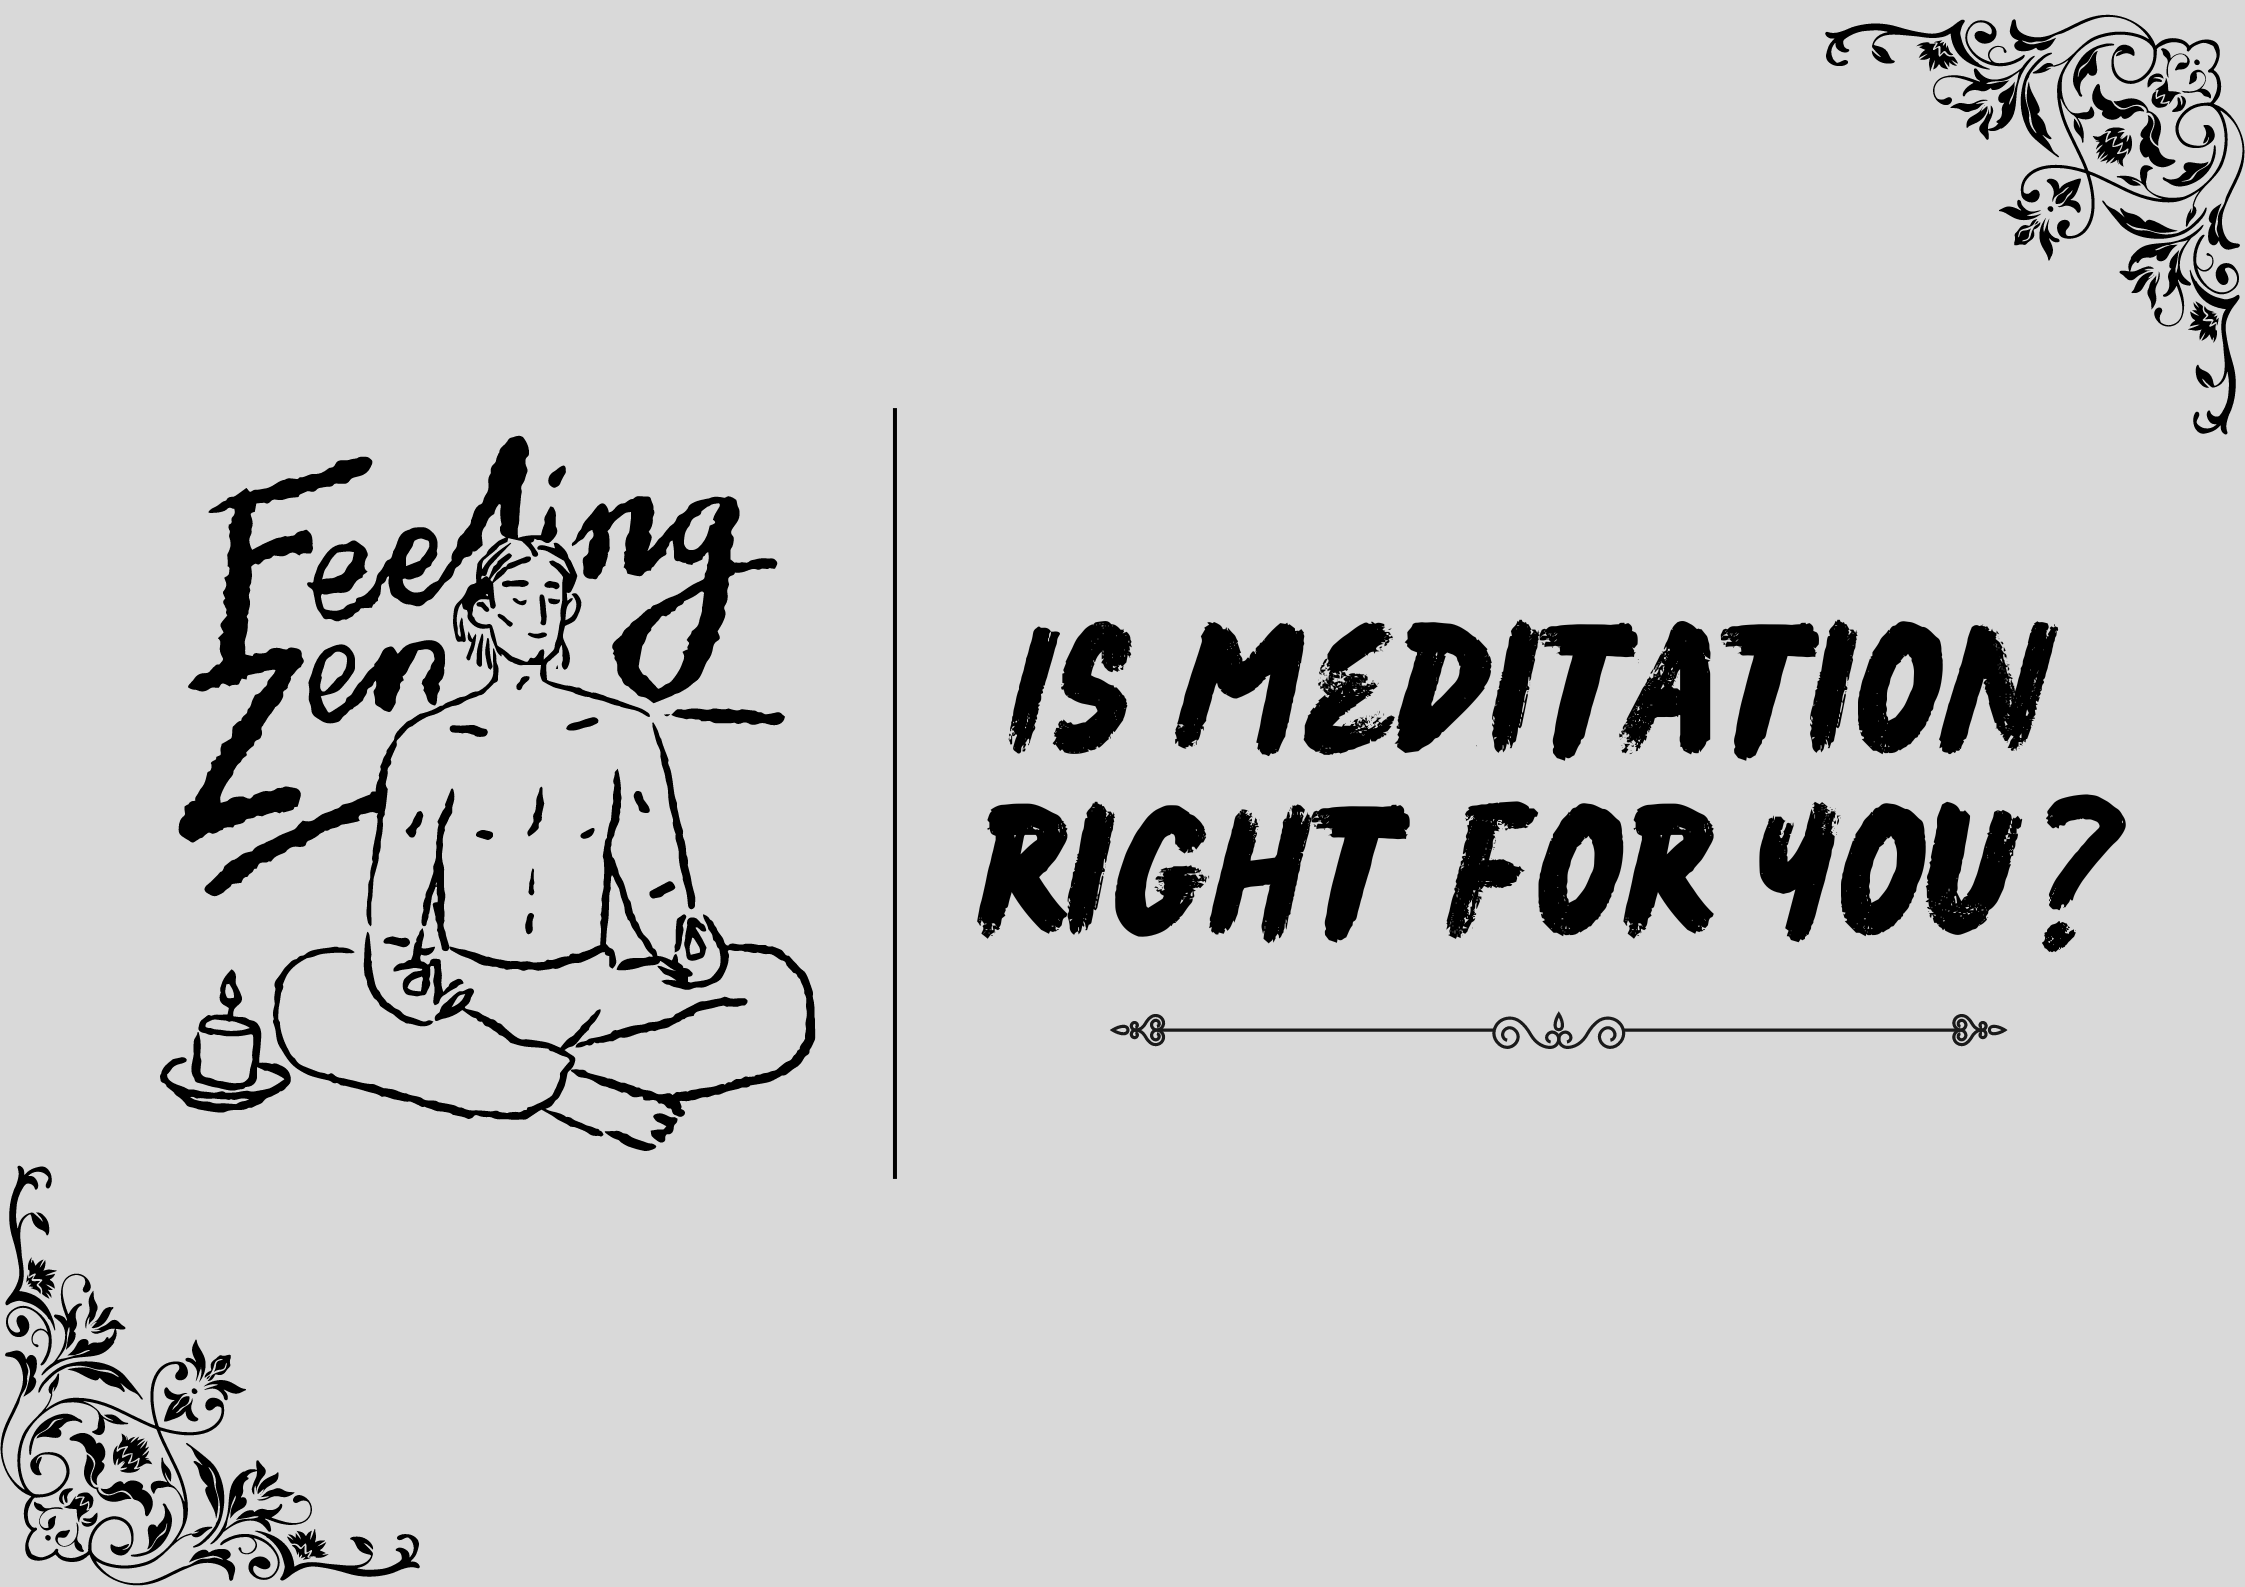 meditation right for you?